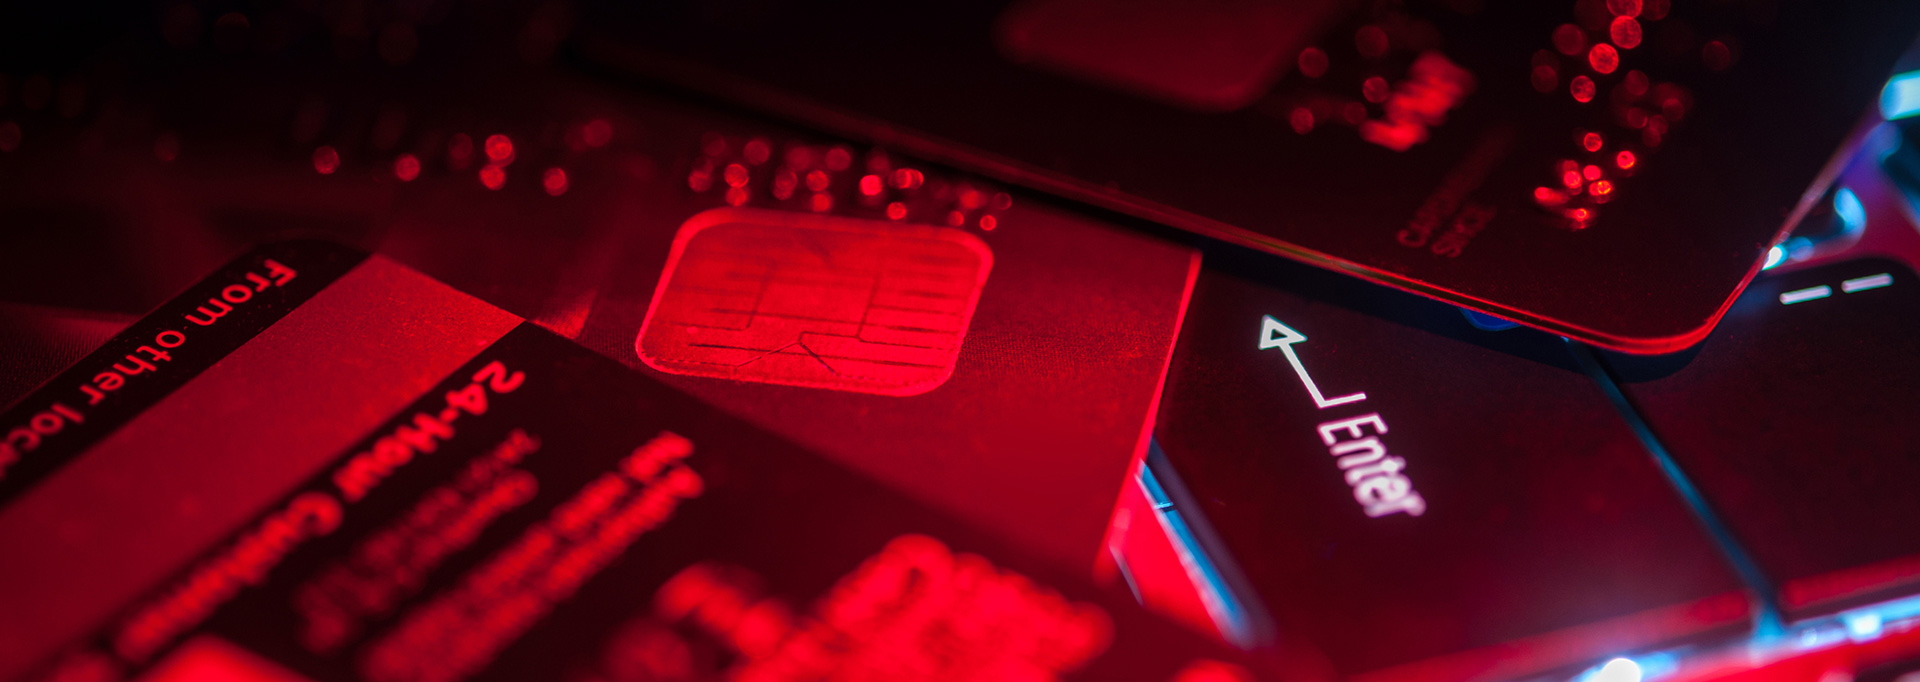 credit cards on computer with red light